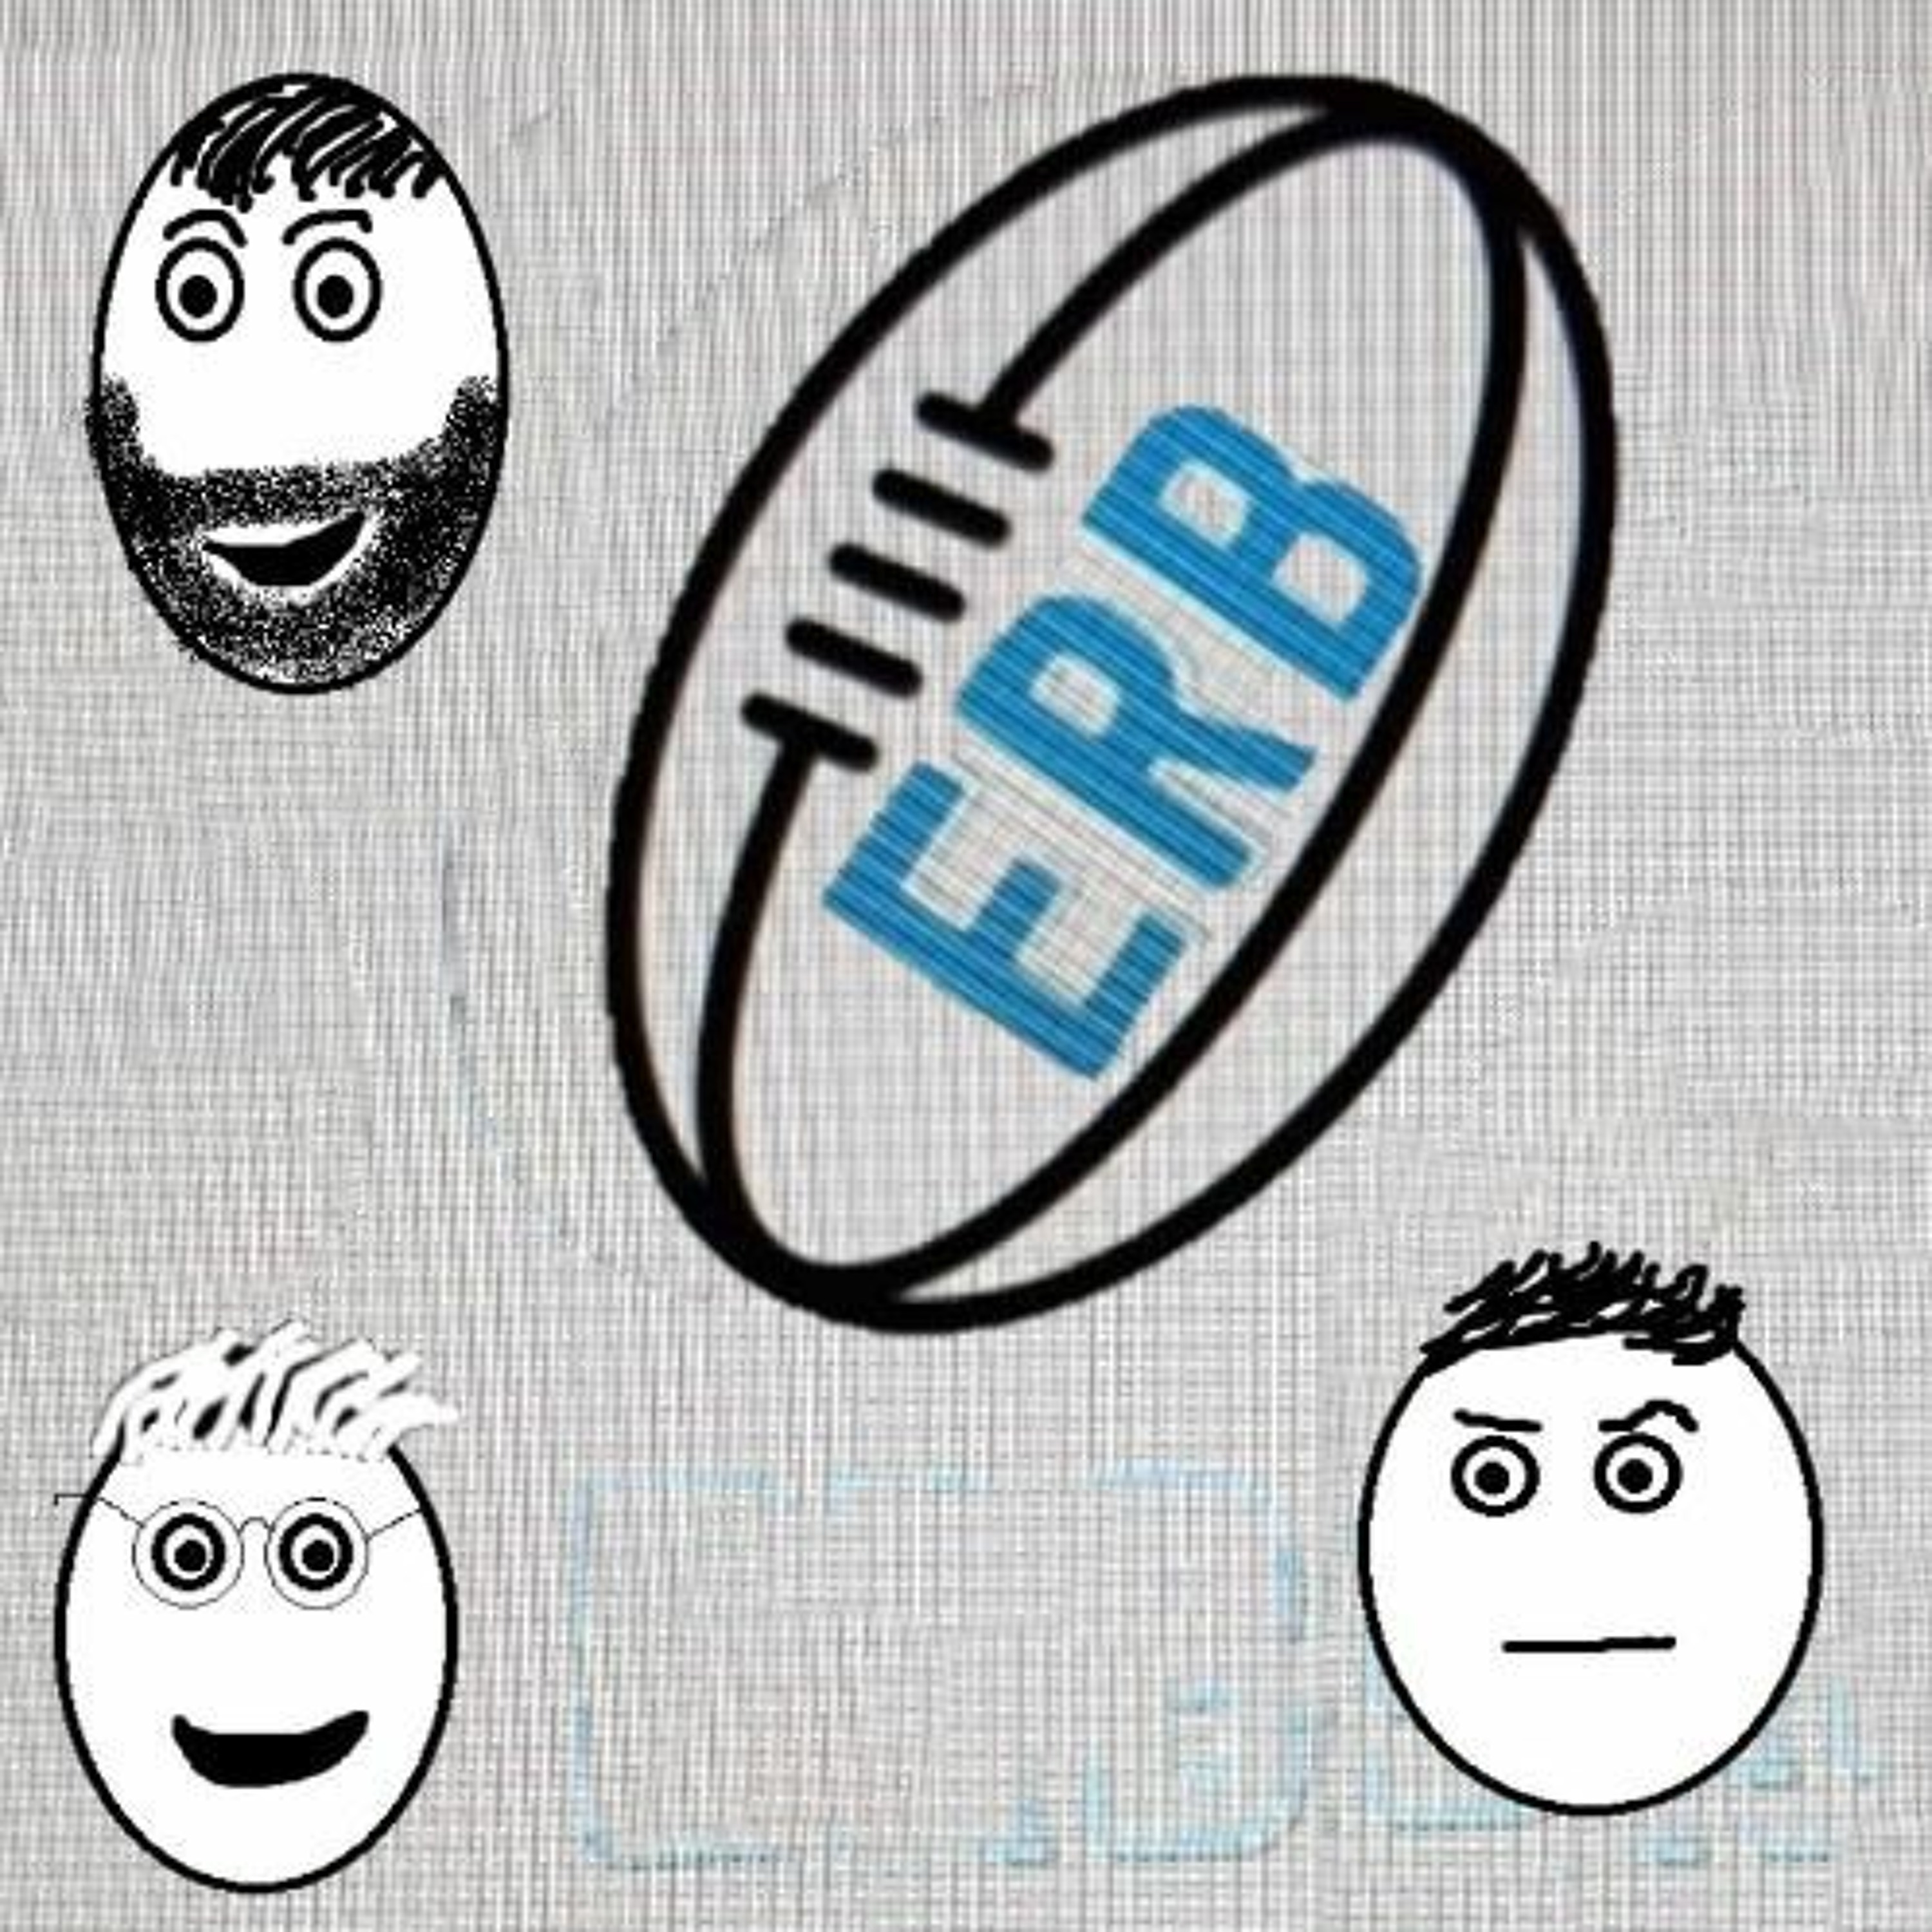 Episode 256: The URC - The Unrelated Rugby Content